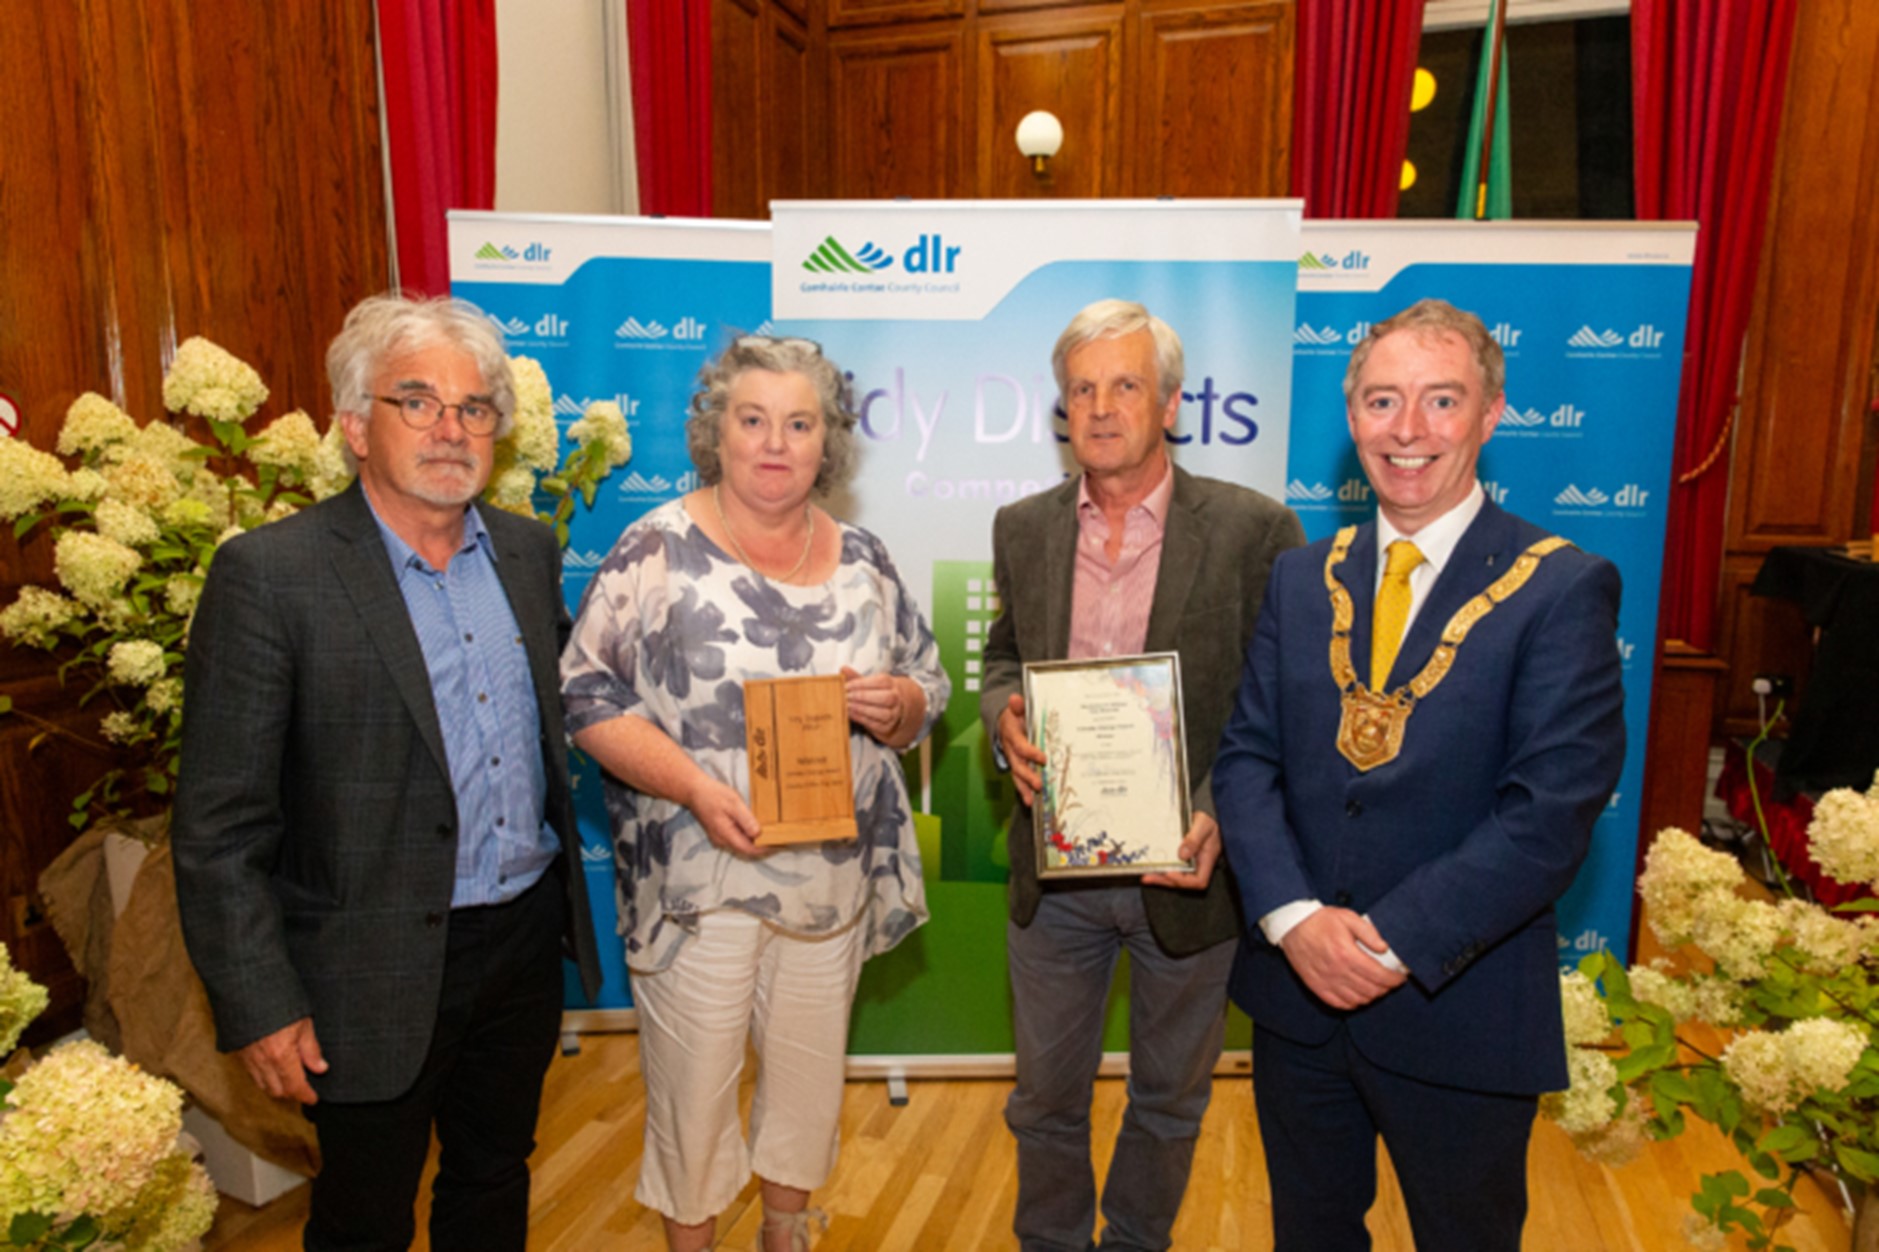 11th September 2019 - County Hall, Dún Laoghaire